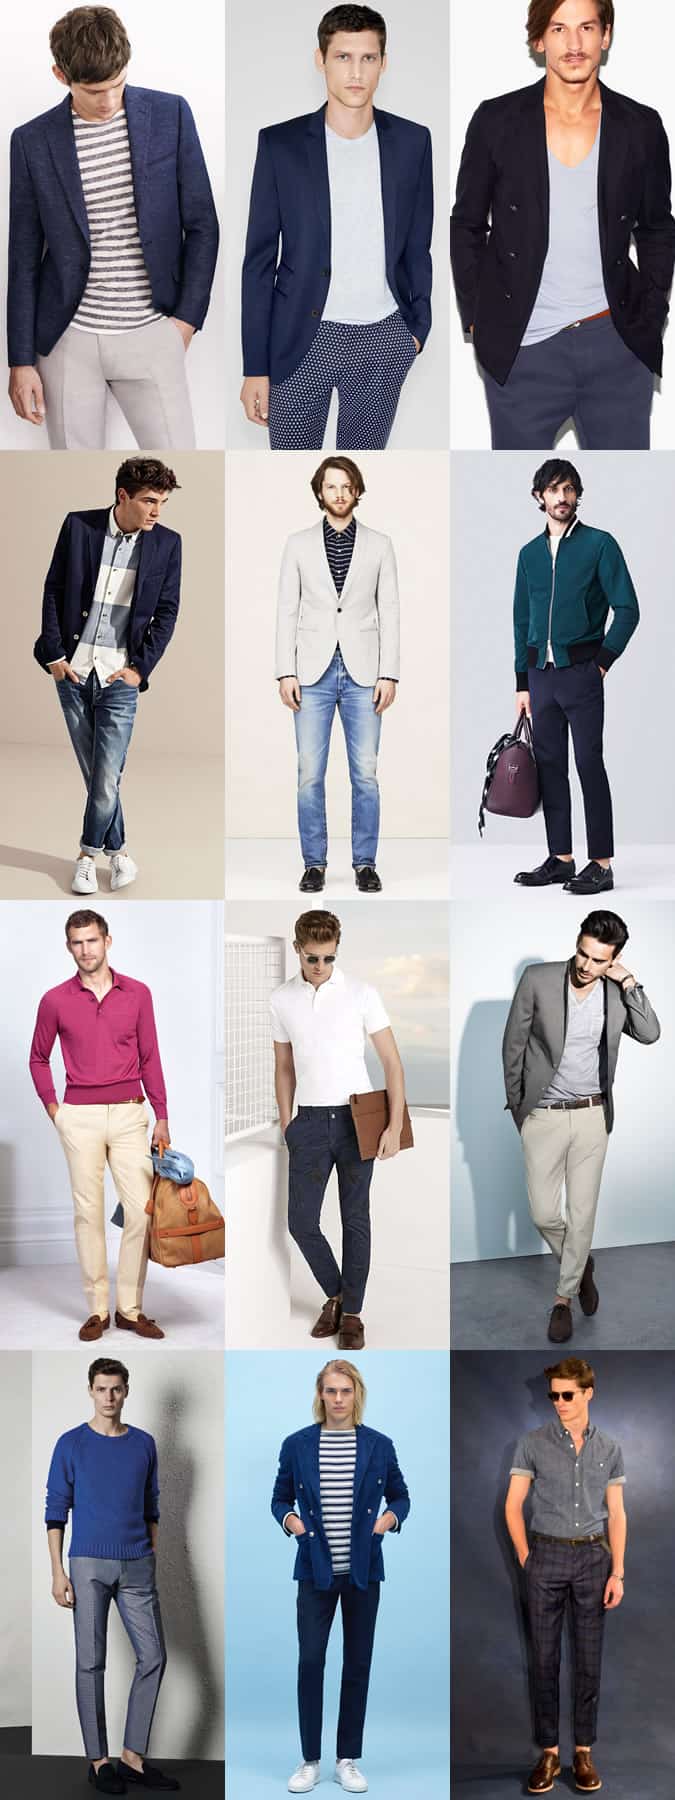 Men's Dress Down Friday Outfit Examples - Using Separates